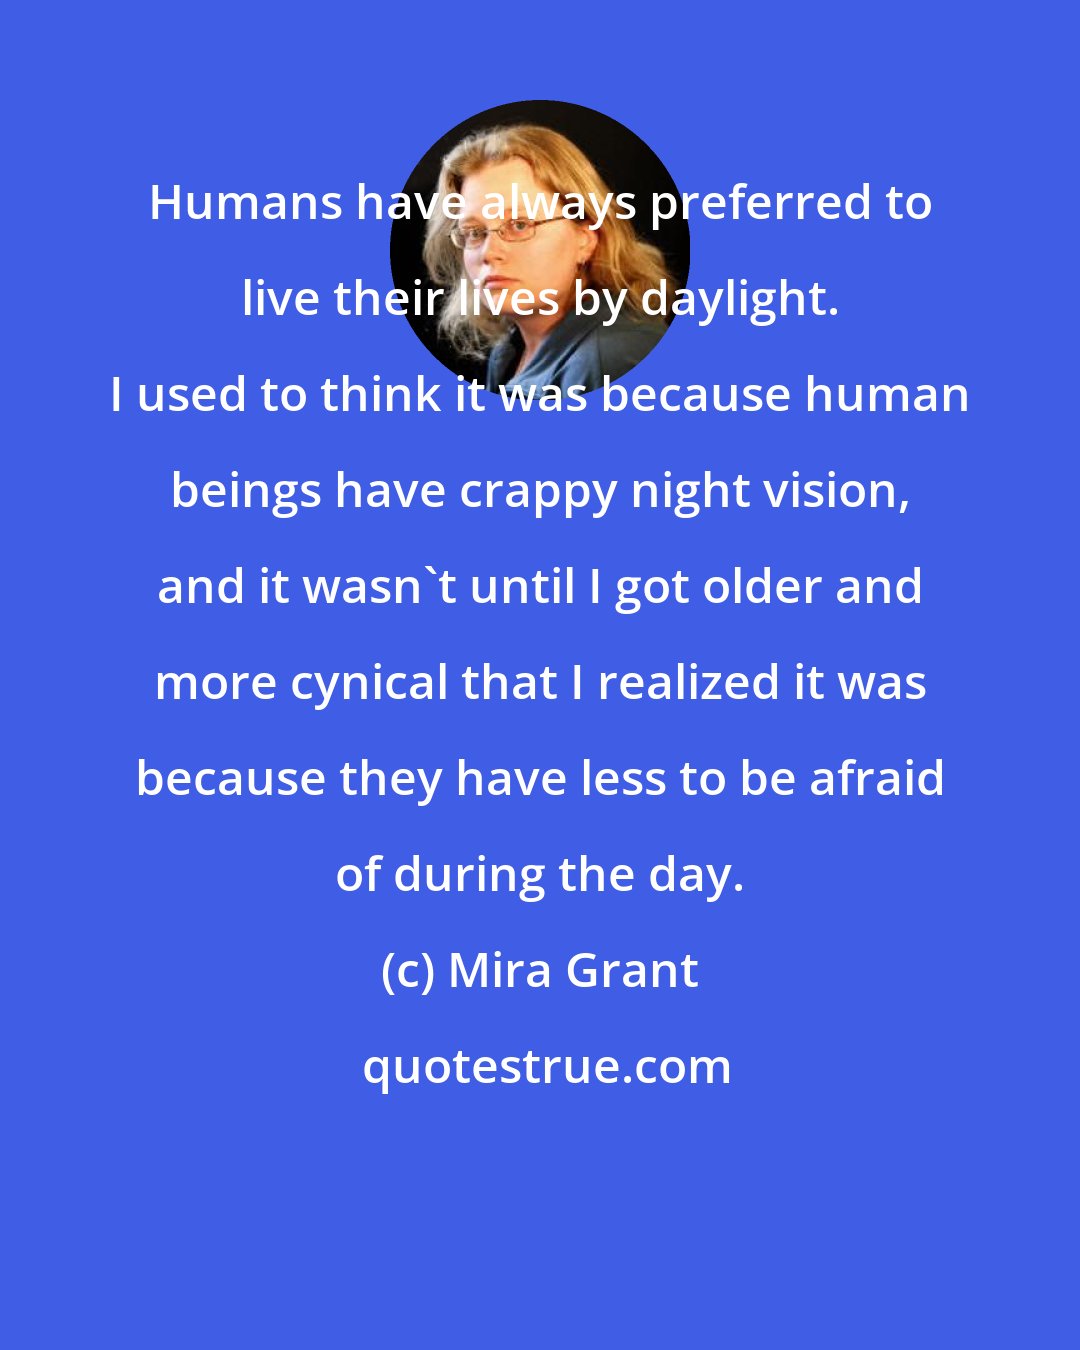 Mira Grant: Humans have always preferred to live their lives​ by daylight. I used to think it was because human beings have crappy night vision, and it wasn't until I got older and more cynical that I realized it was because they have less to be afraid of during the day.